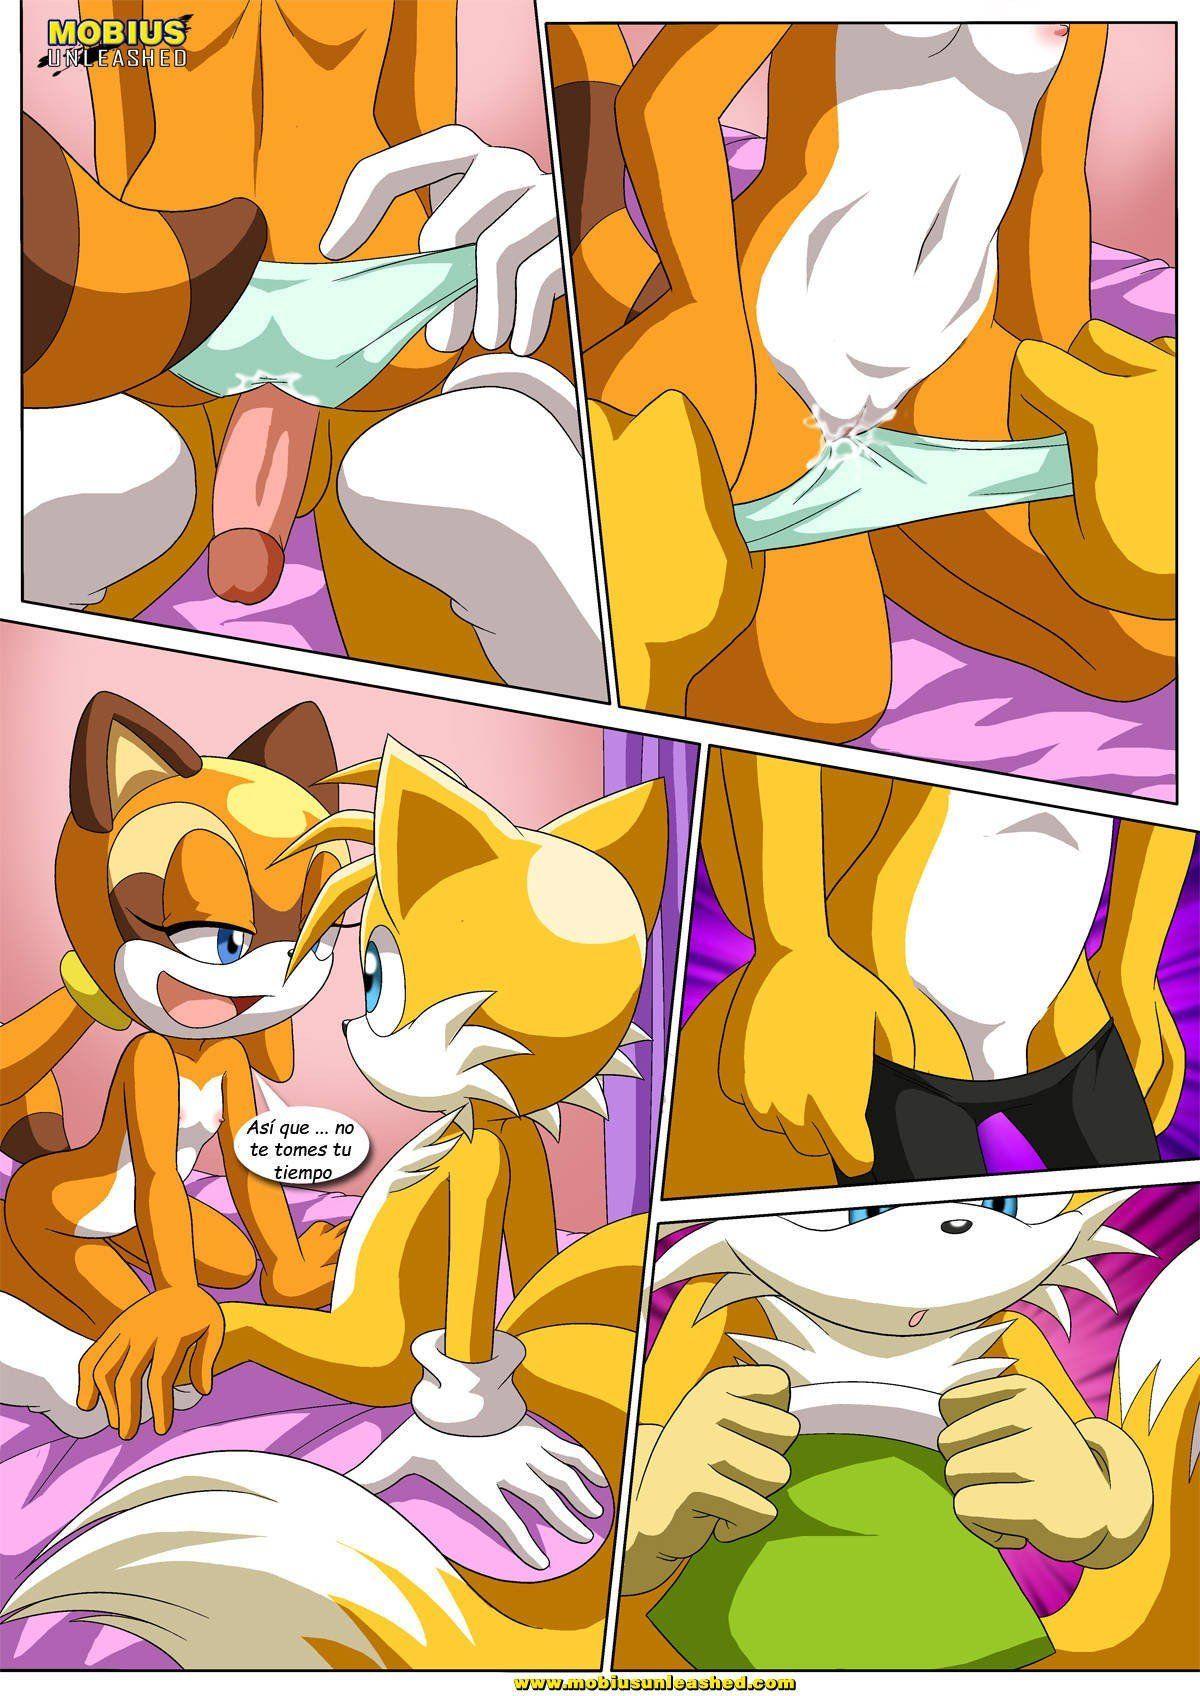 Tator T. recommendet cosmo naked sonic